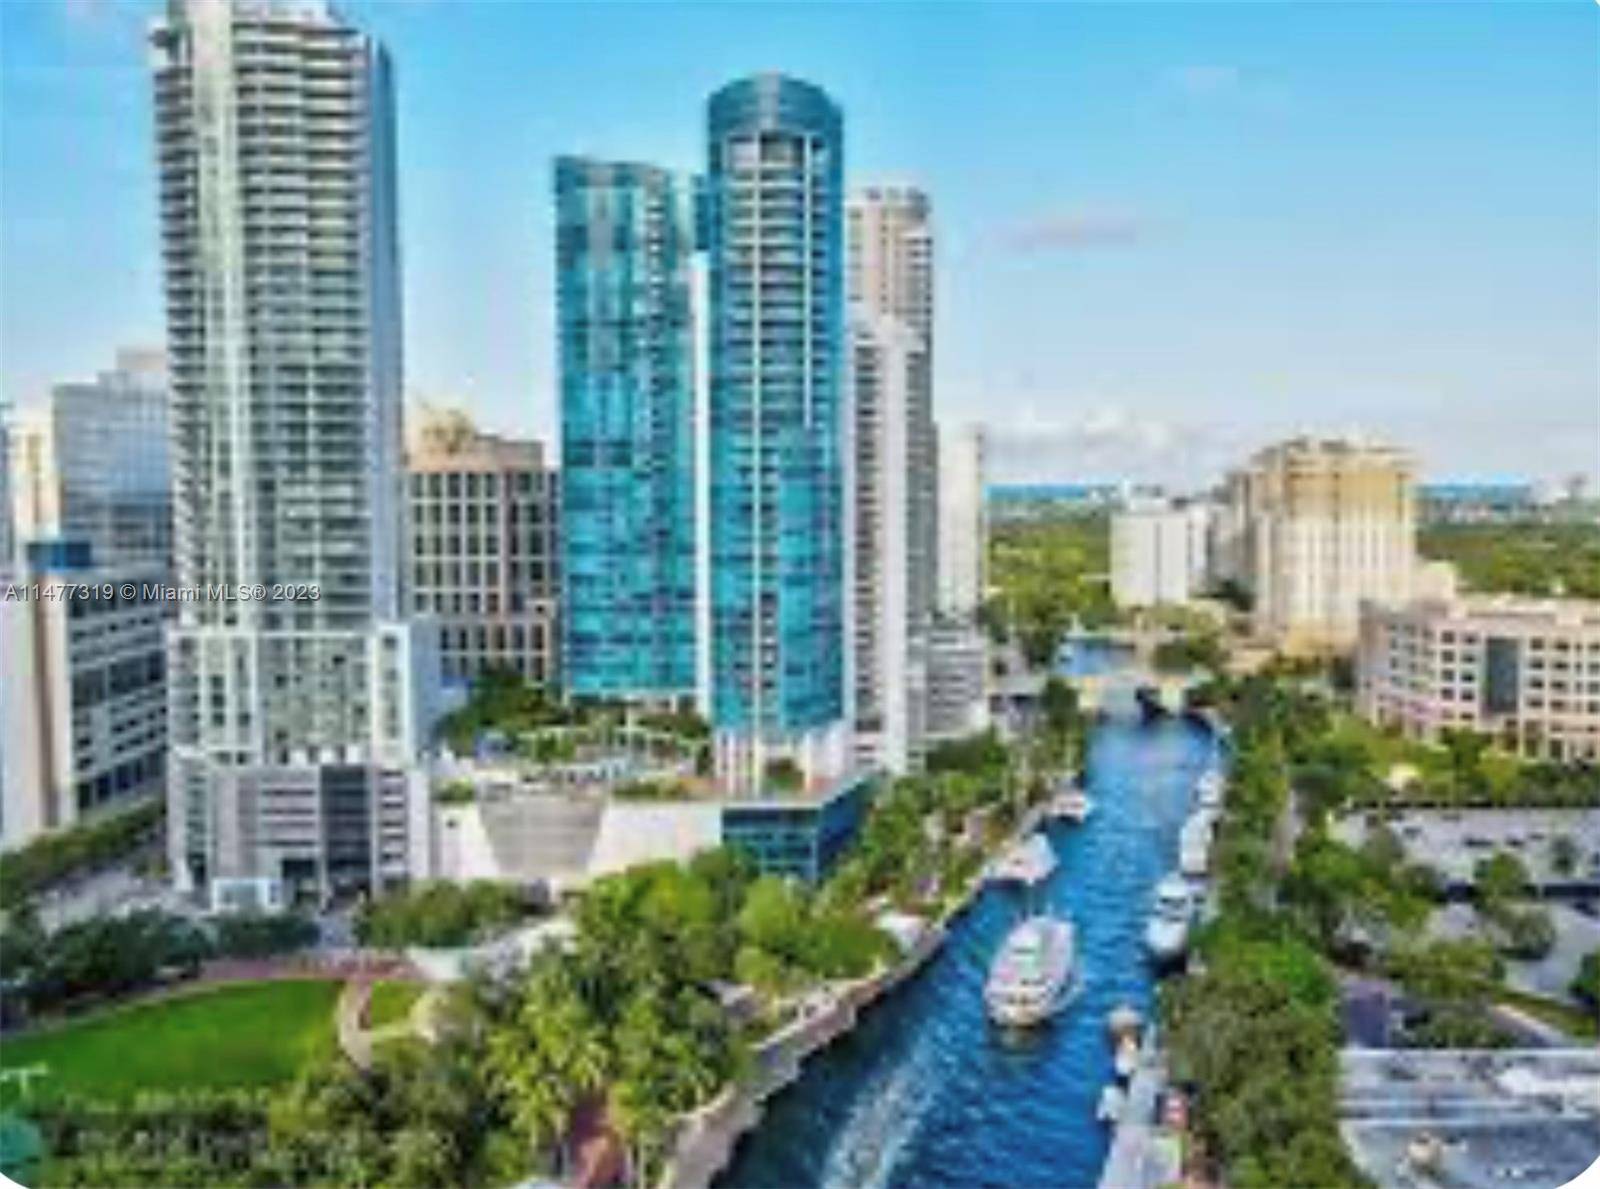 Luxurious one bedroom residence in the iconic Las Olas River House, Fort Lauderdale.